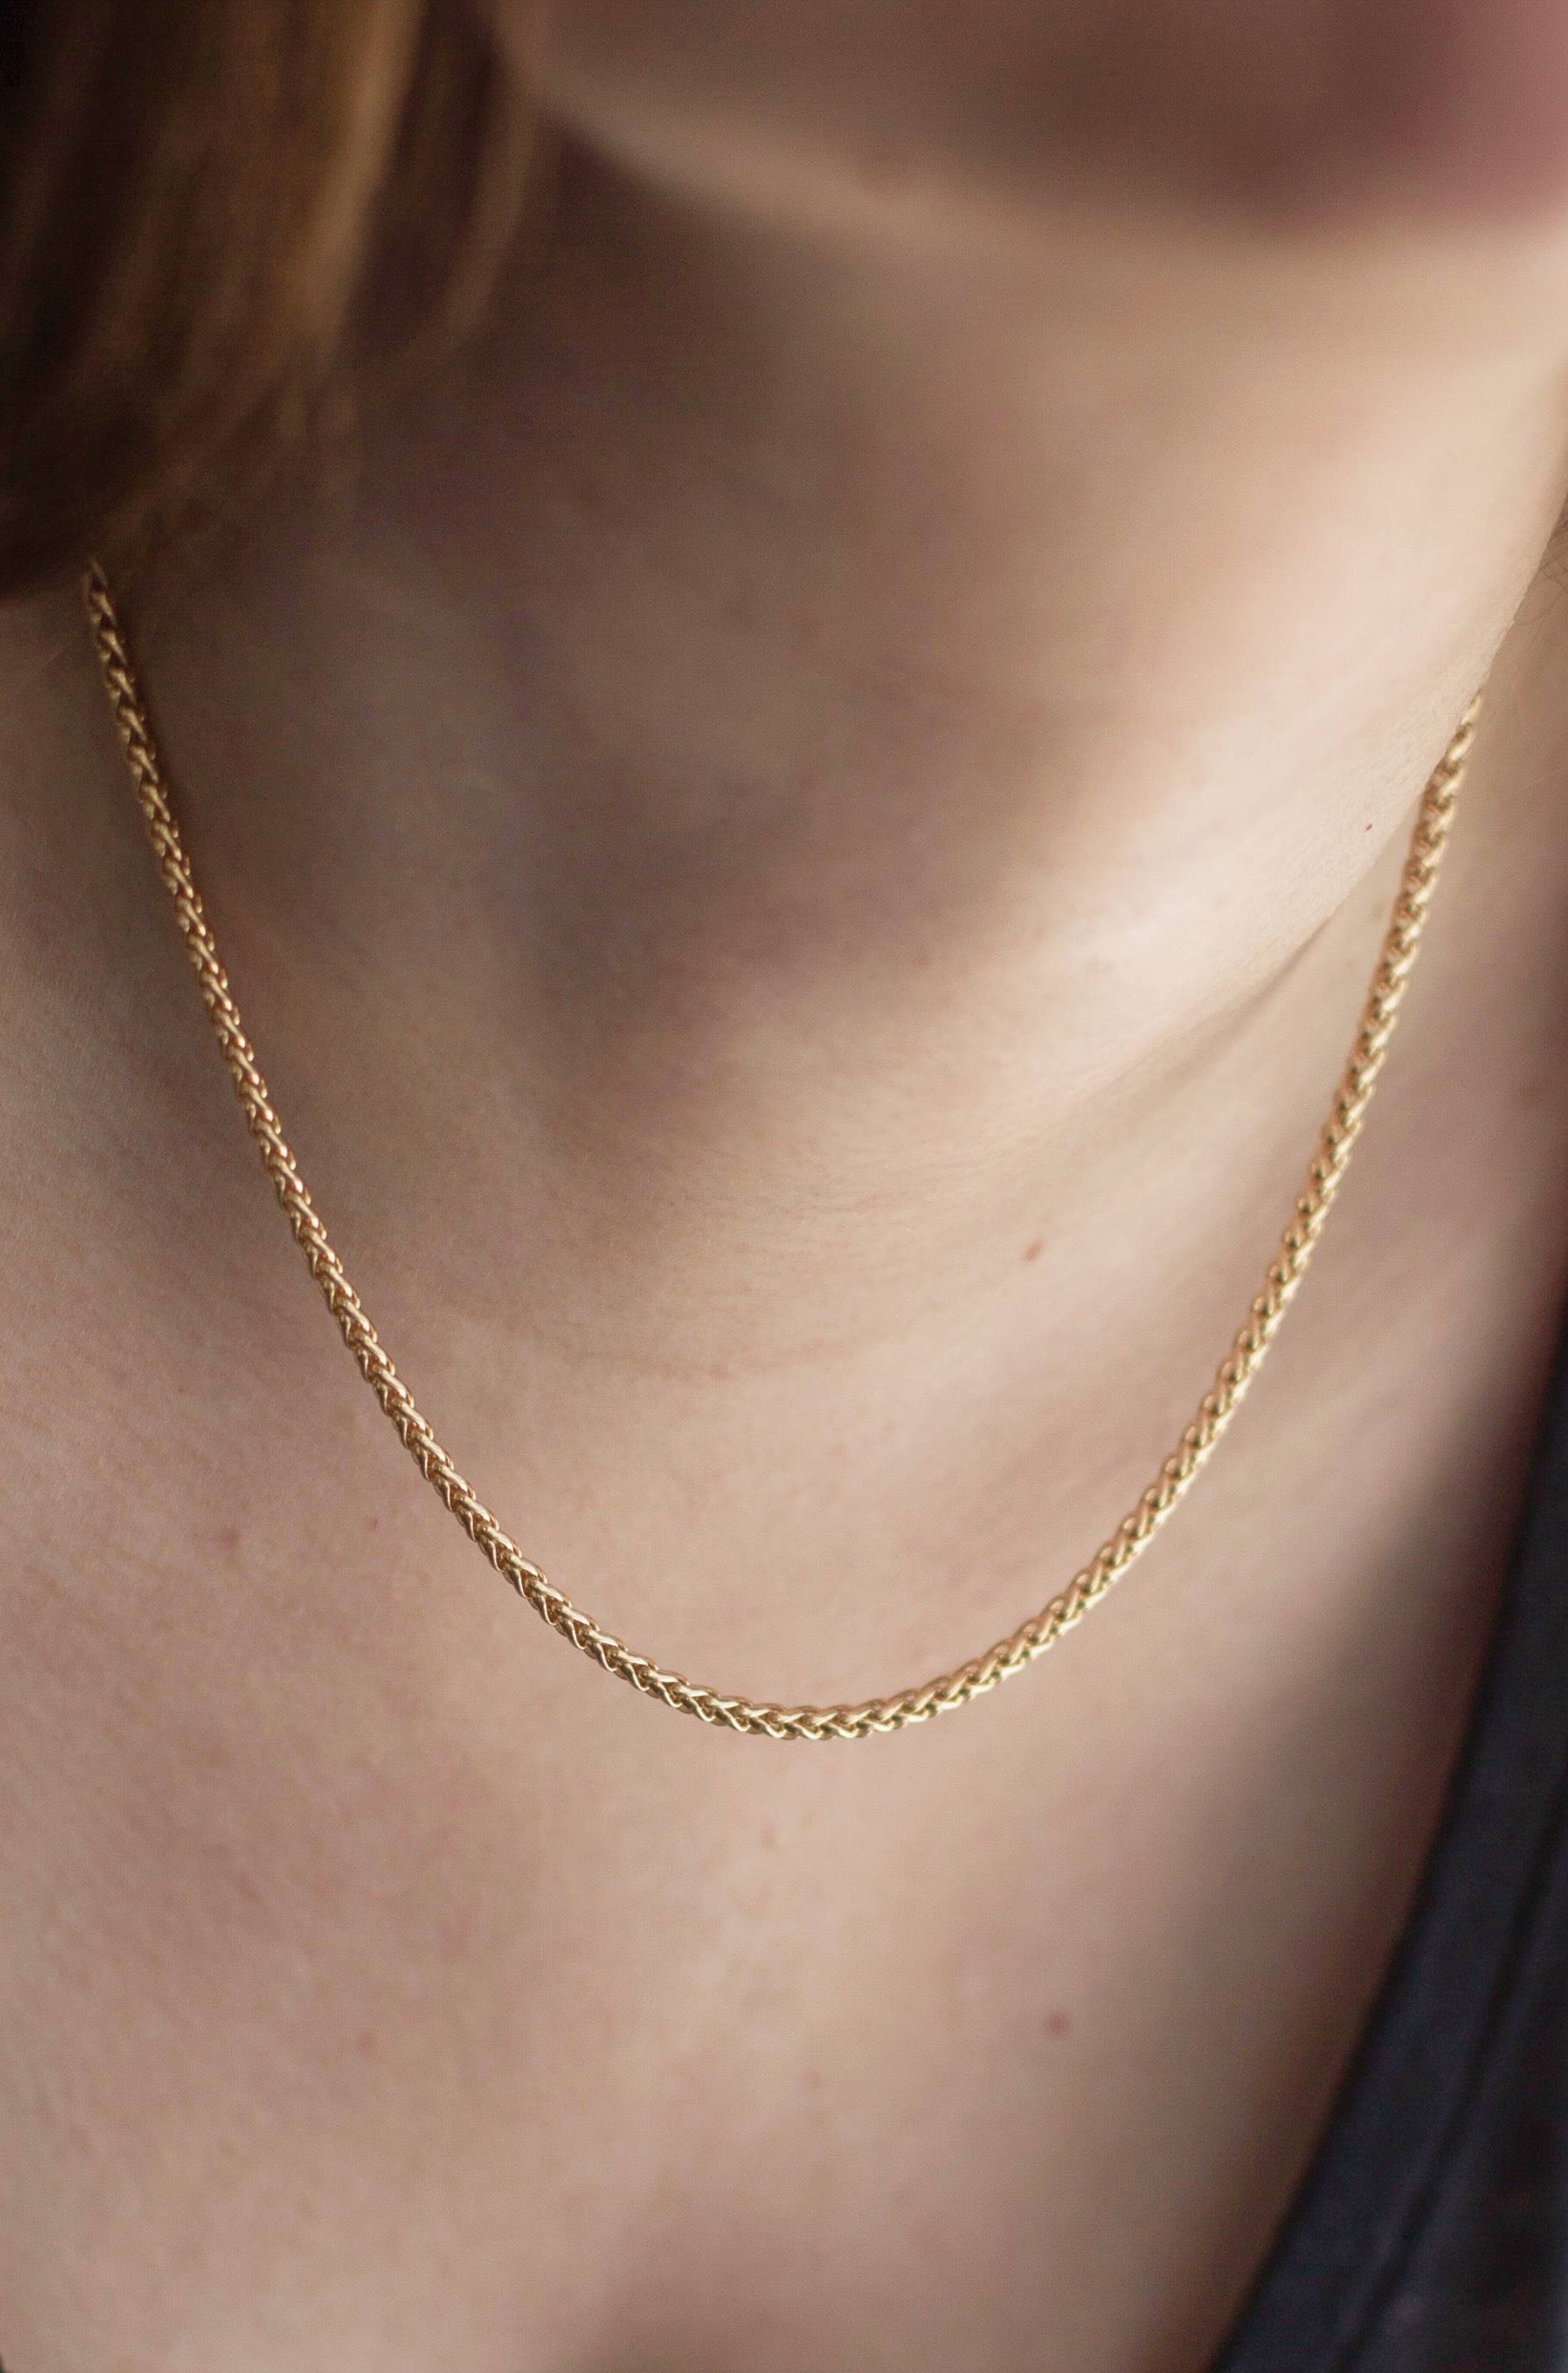 Close up look of a model wearing the necklace, letting the chain effortlessly dangles from her neck.